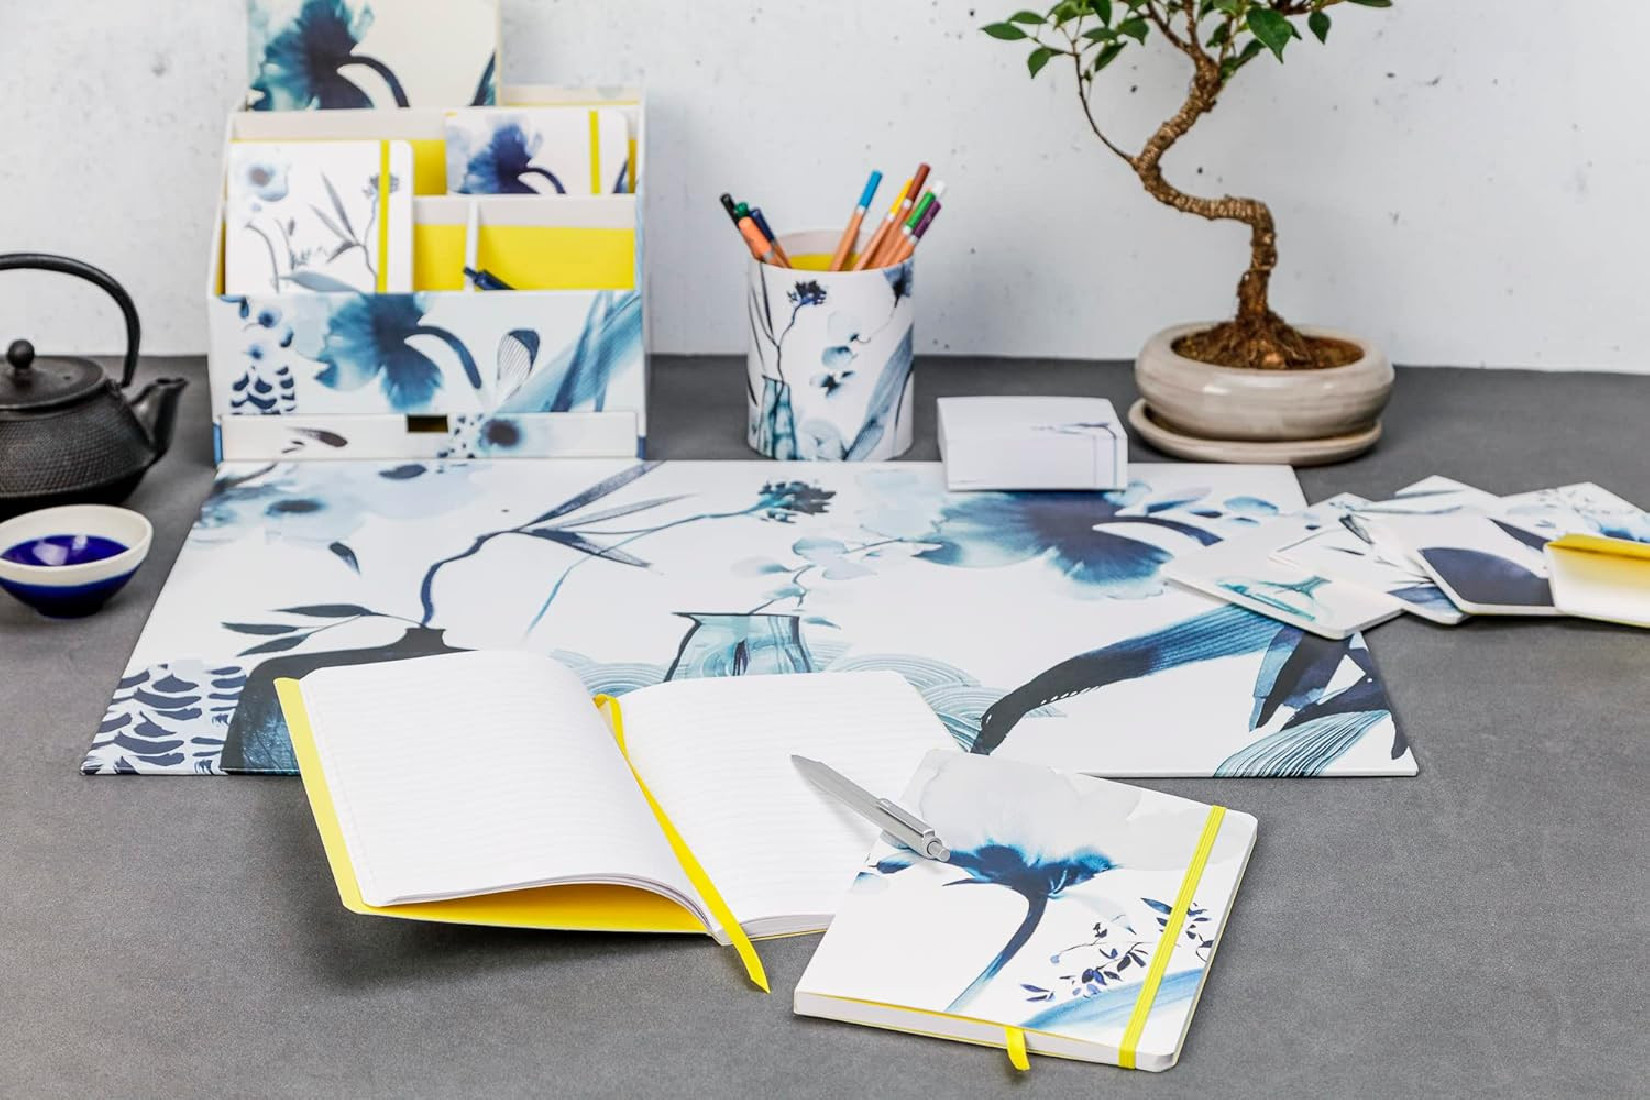 Clairefontaine Rhodia 115931C - A Blue Ink Floral Pattern Paperback Notebook - A5 14.8x21cm - 128 Lined Pages 90g White Paper - Elastic - Bookmark - Inkebana Collection